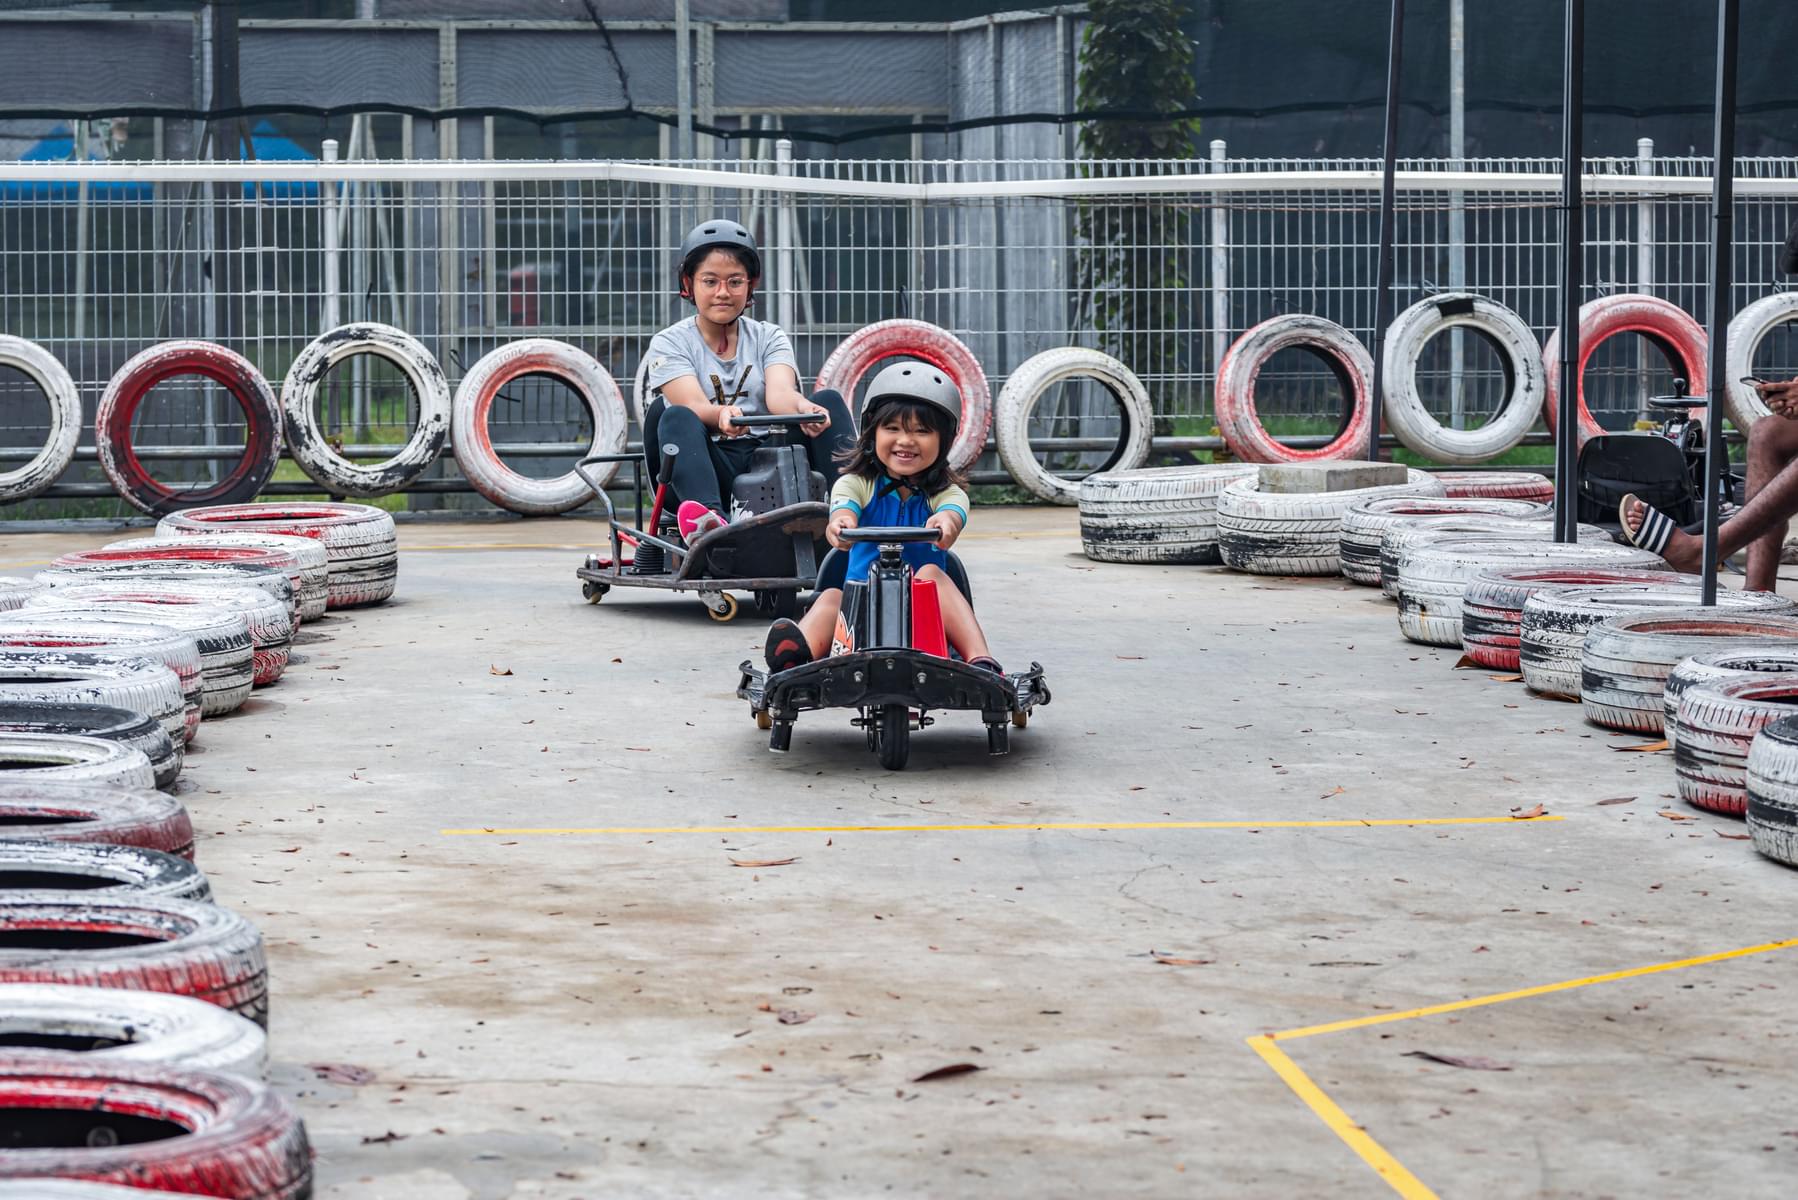 What Are The Requirements To Go-Kart In Singapore